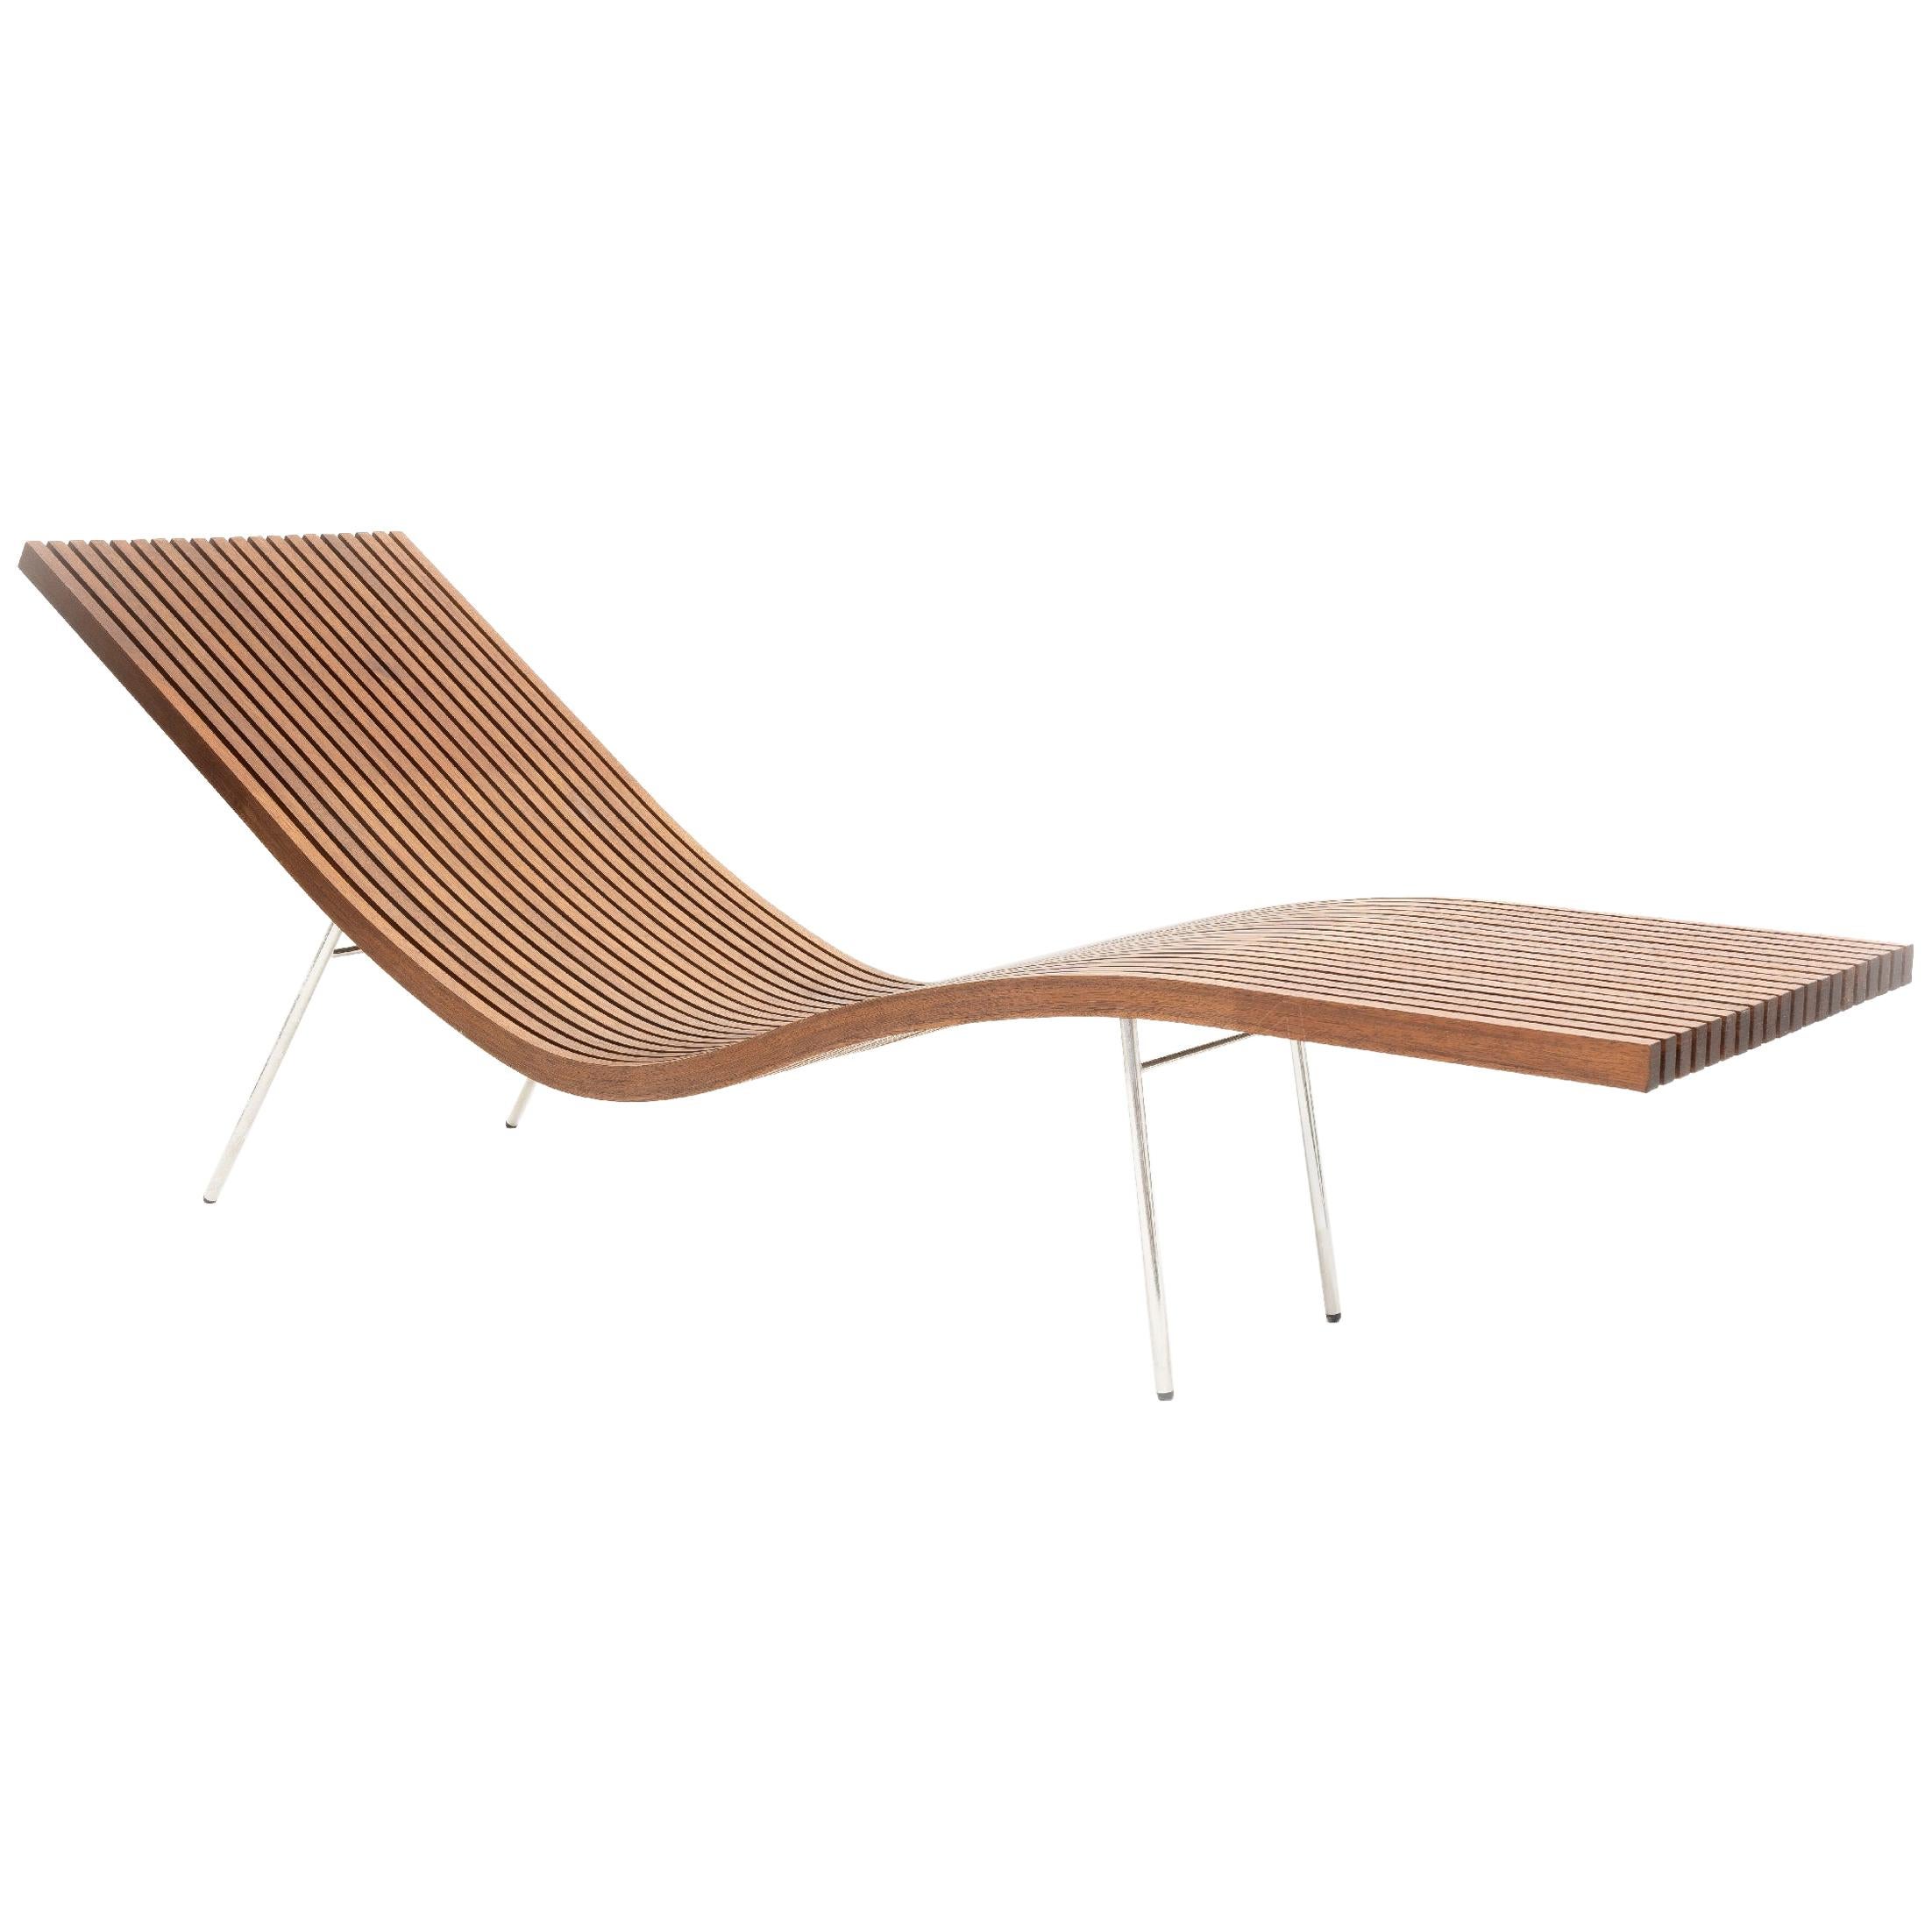 Rare item.
This chaise lounge is made of bent mahogany and chromed tubular metal. Cushion included.
As seen in the architectural masterpiece Thermes of Vals.
It echoes the classic aesthetic of the Bauhaus and Thonet.

Peter Zumthor is a Swiss